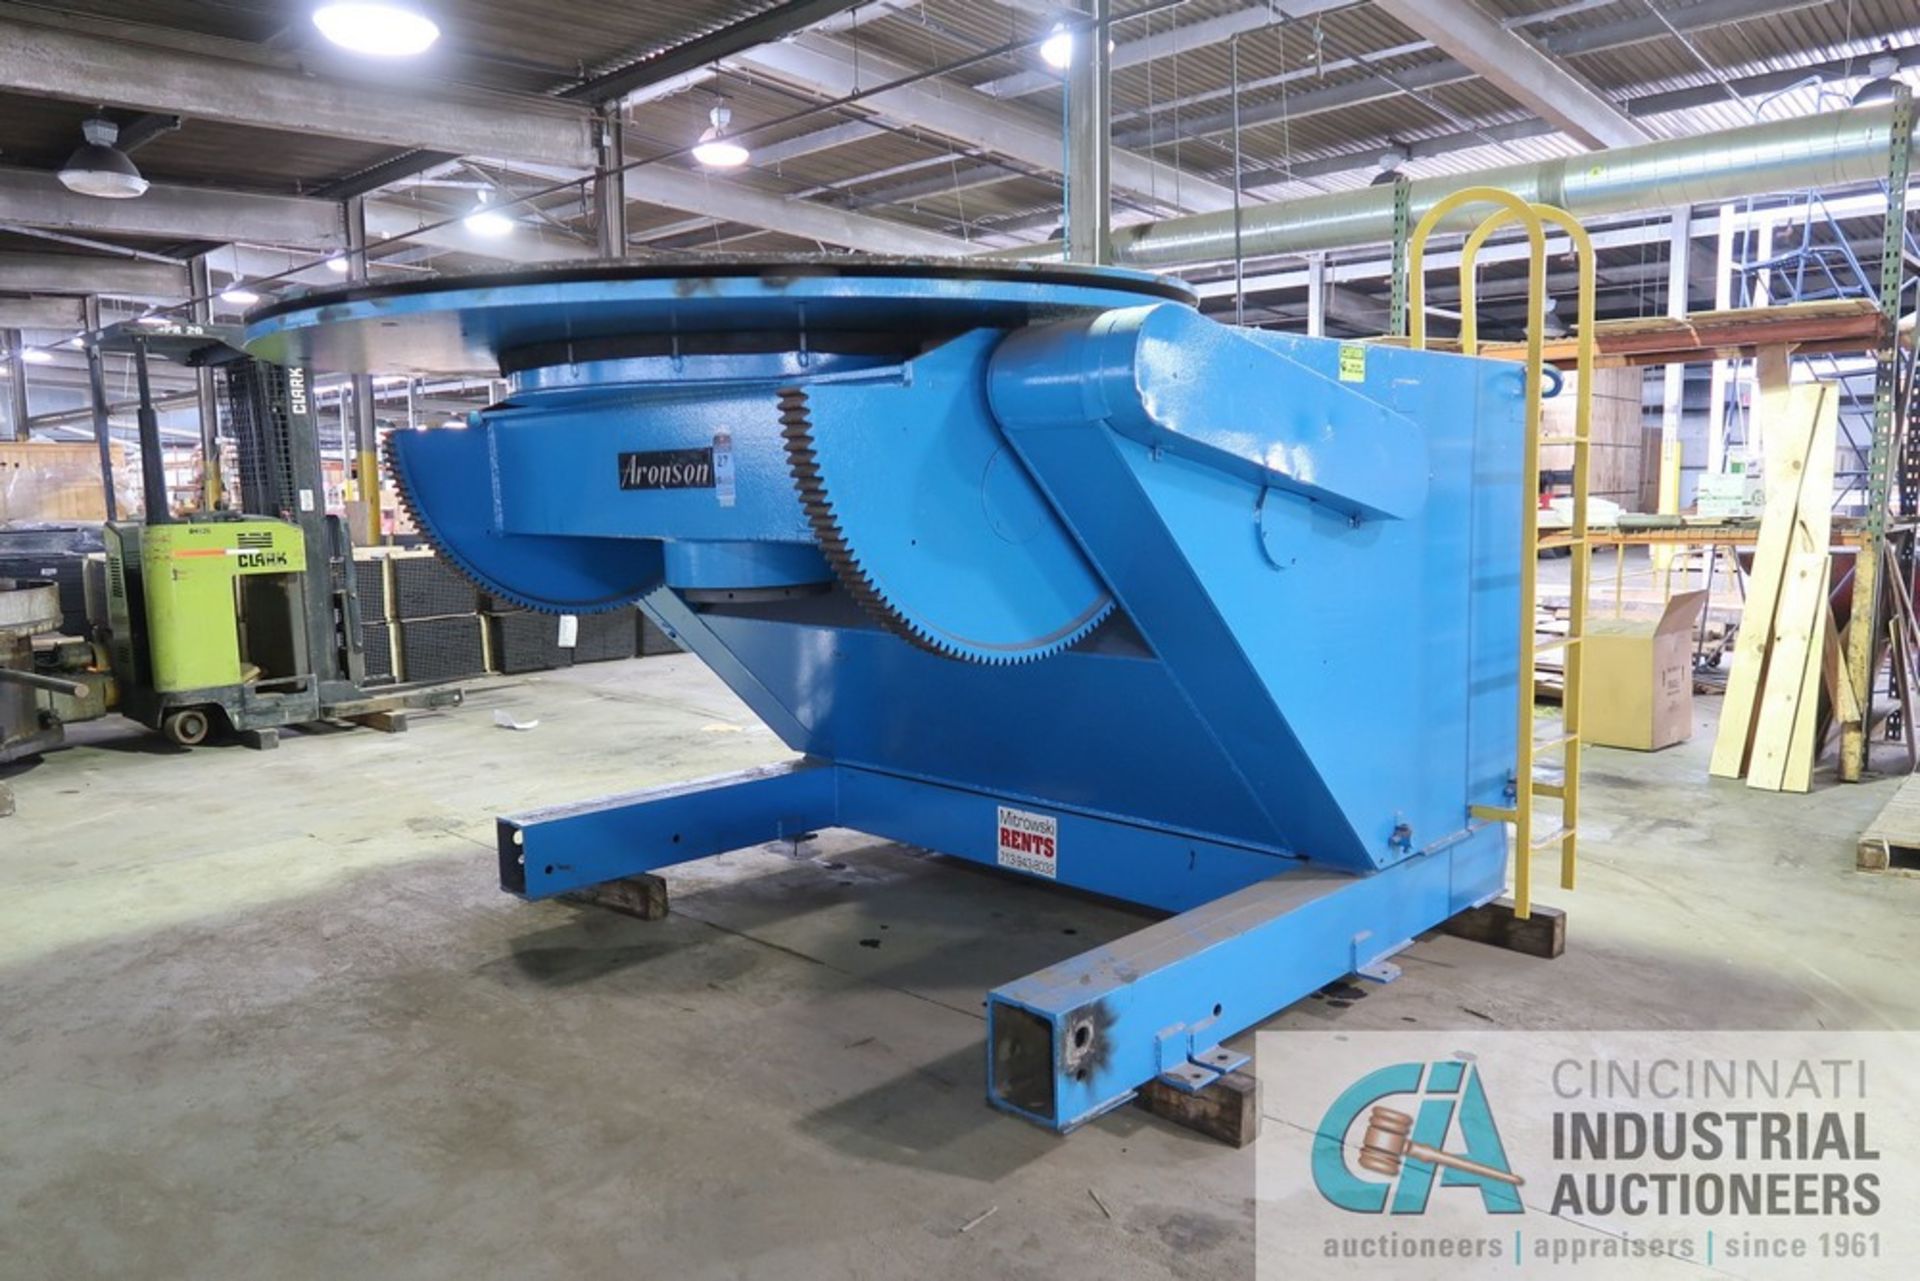 50,000 LB. ARONSON MODEL HD 500 TILTING AND ROTATING WELDING POSITIONER - Missing Pendant Control